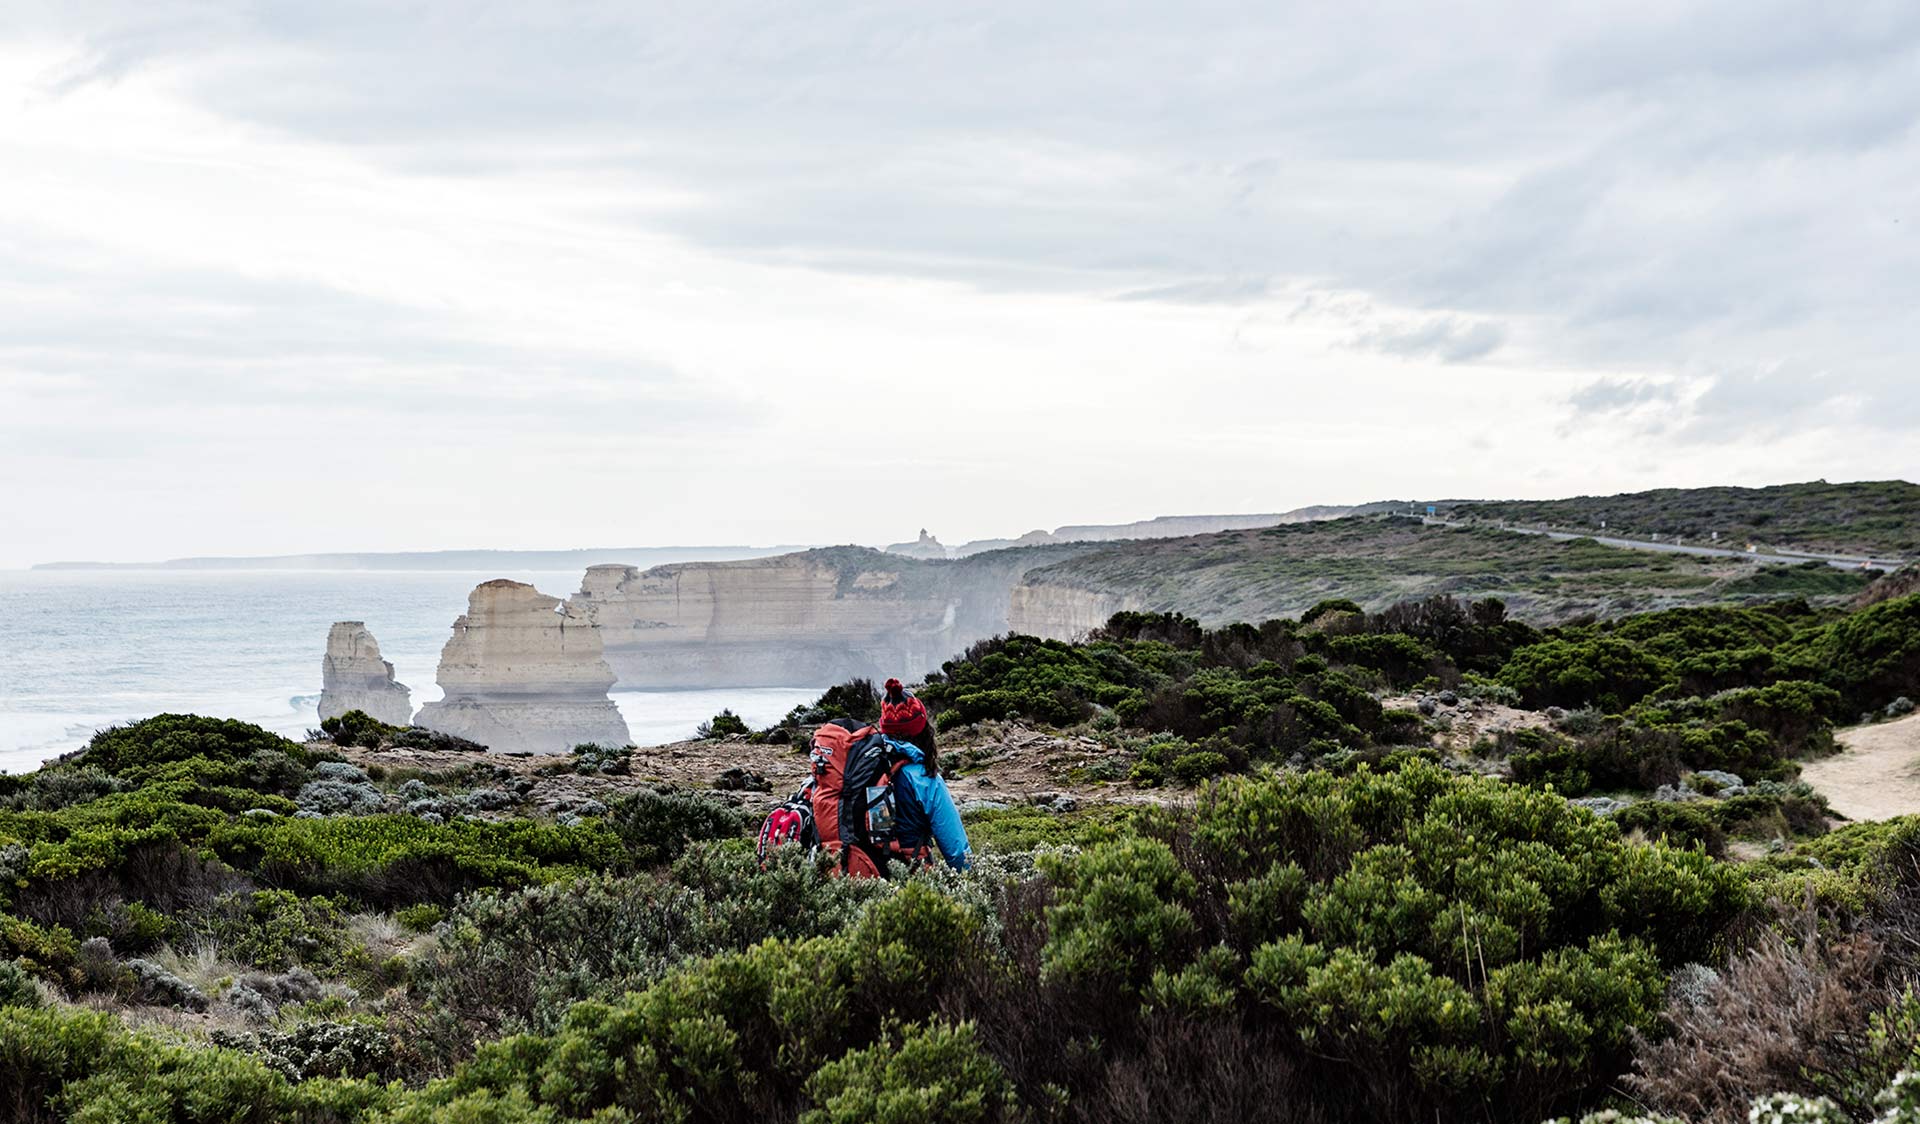 A women in a blue jacket walks through the heath on the cliffs above the Twelve Apostles.